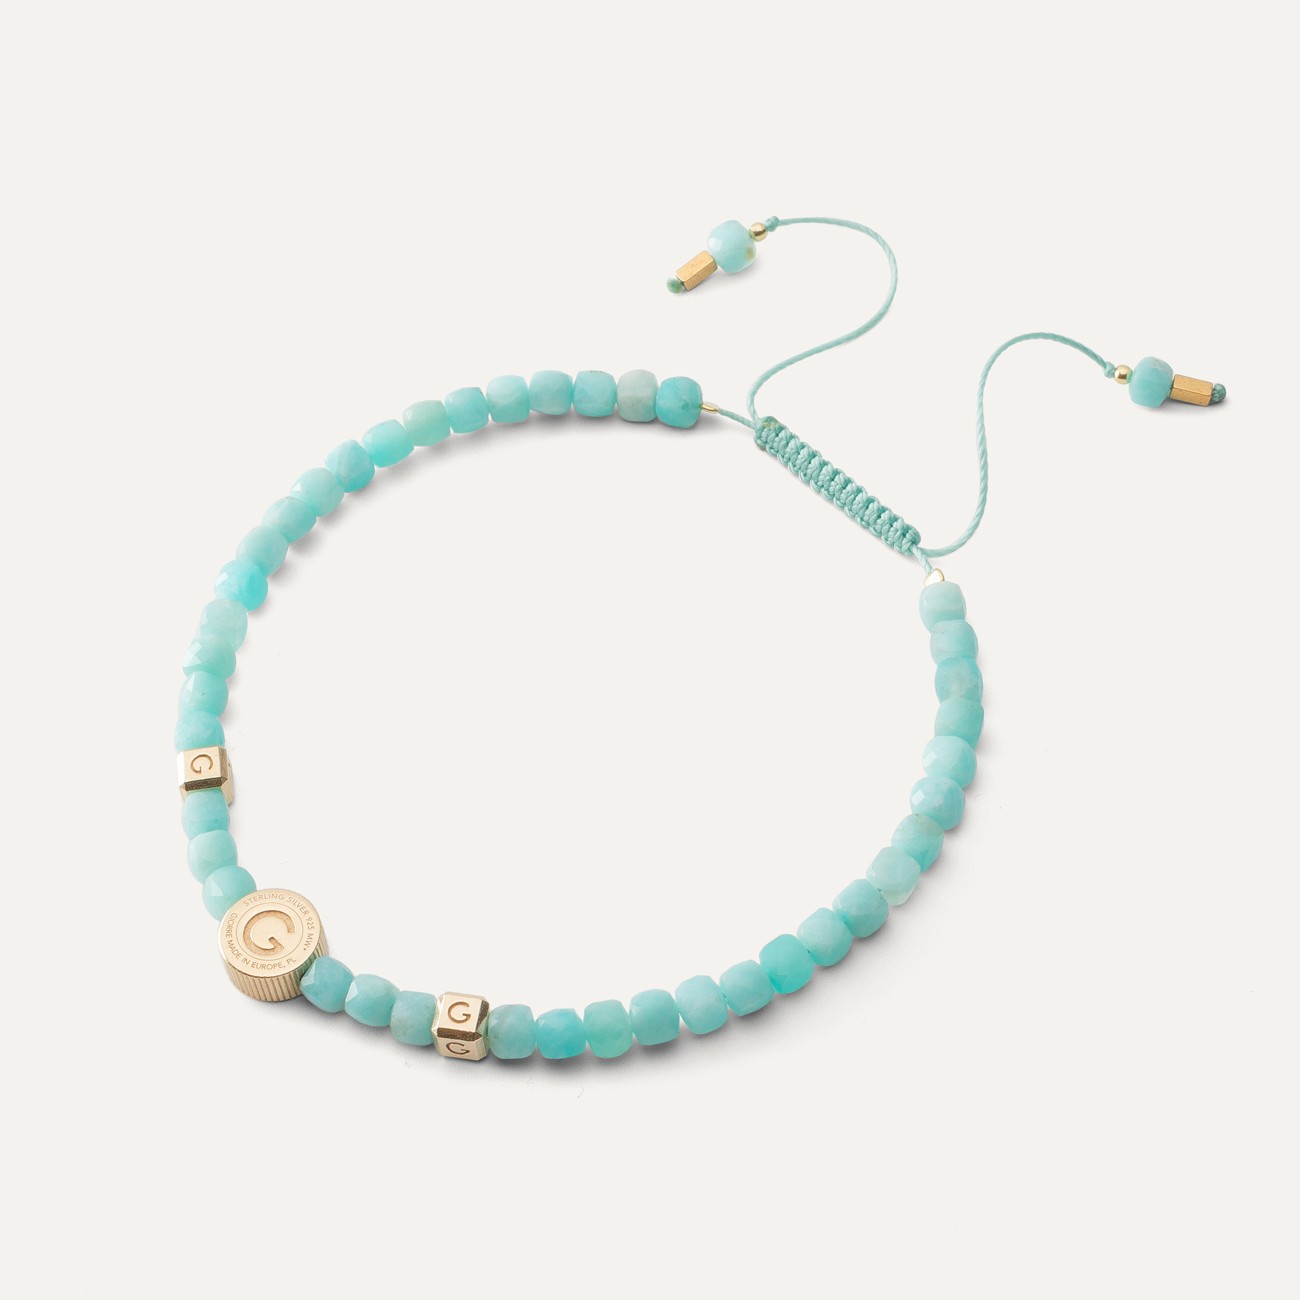 Silver anklet with natural stone - amazonite